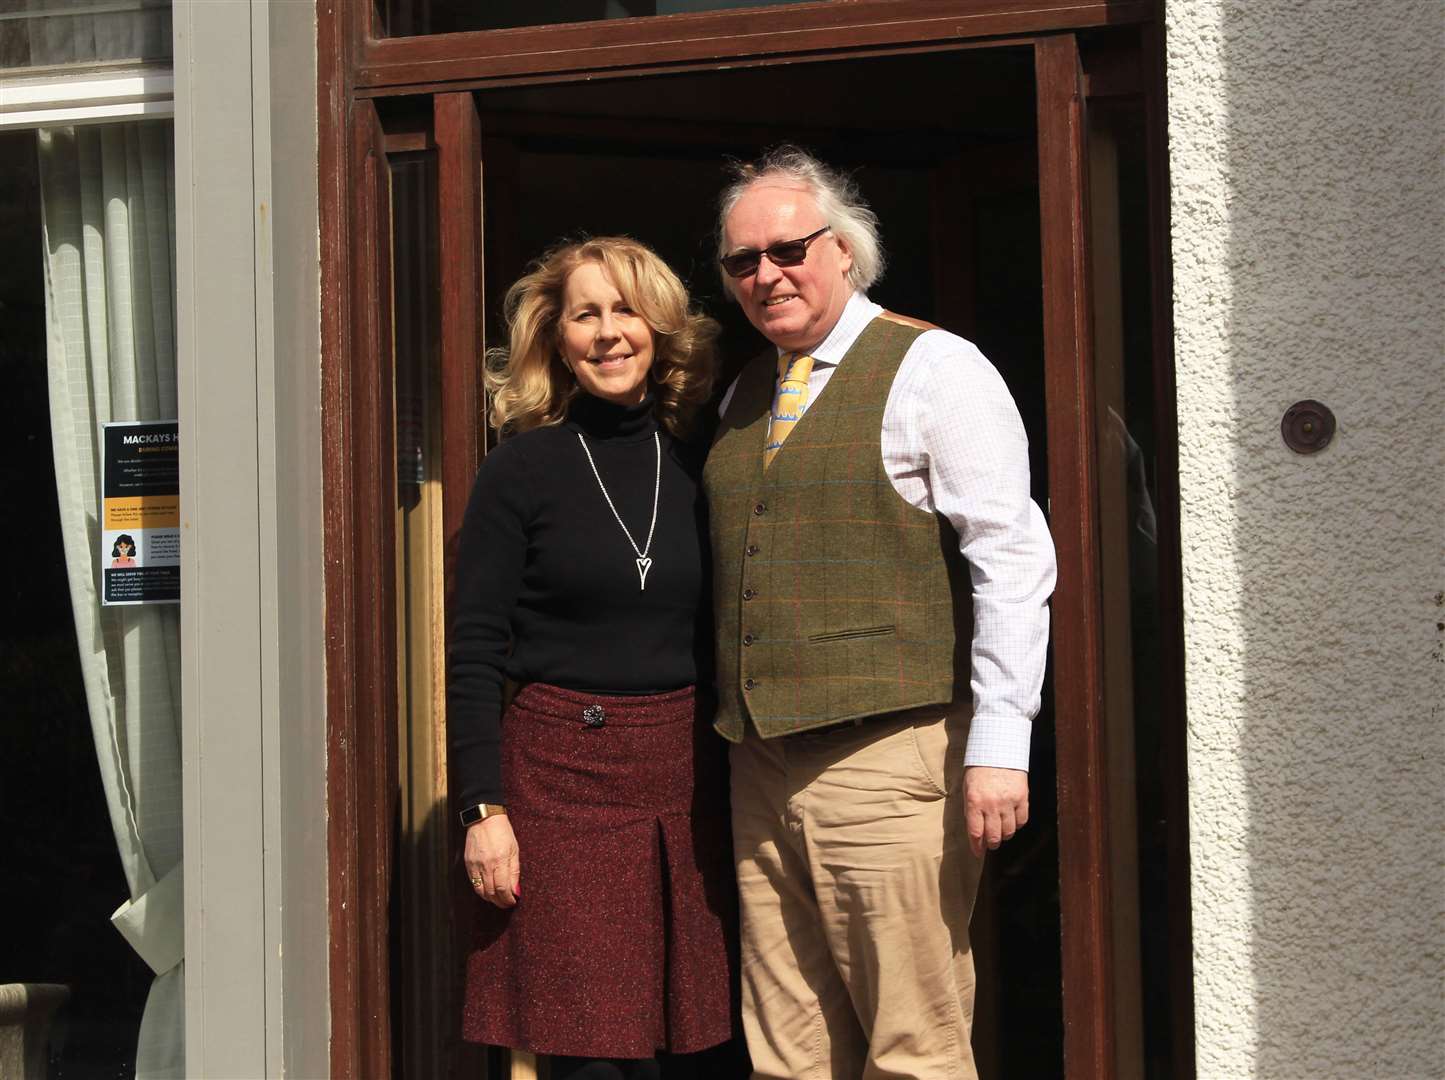 Murray and Ellie Lamont, of Mackays Hotel in Wick, say they are hopeful that the lifting of legal restrictions will open up the hospitality trade but they want staff and customers to feel safe. Picture: Alan Hendry